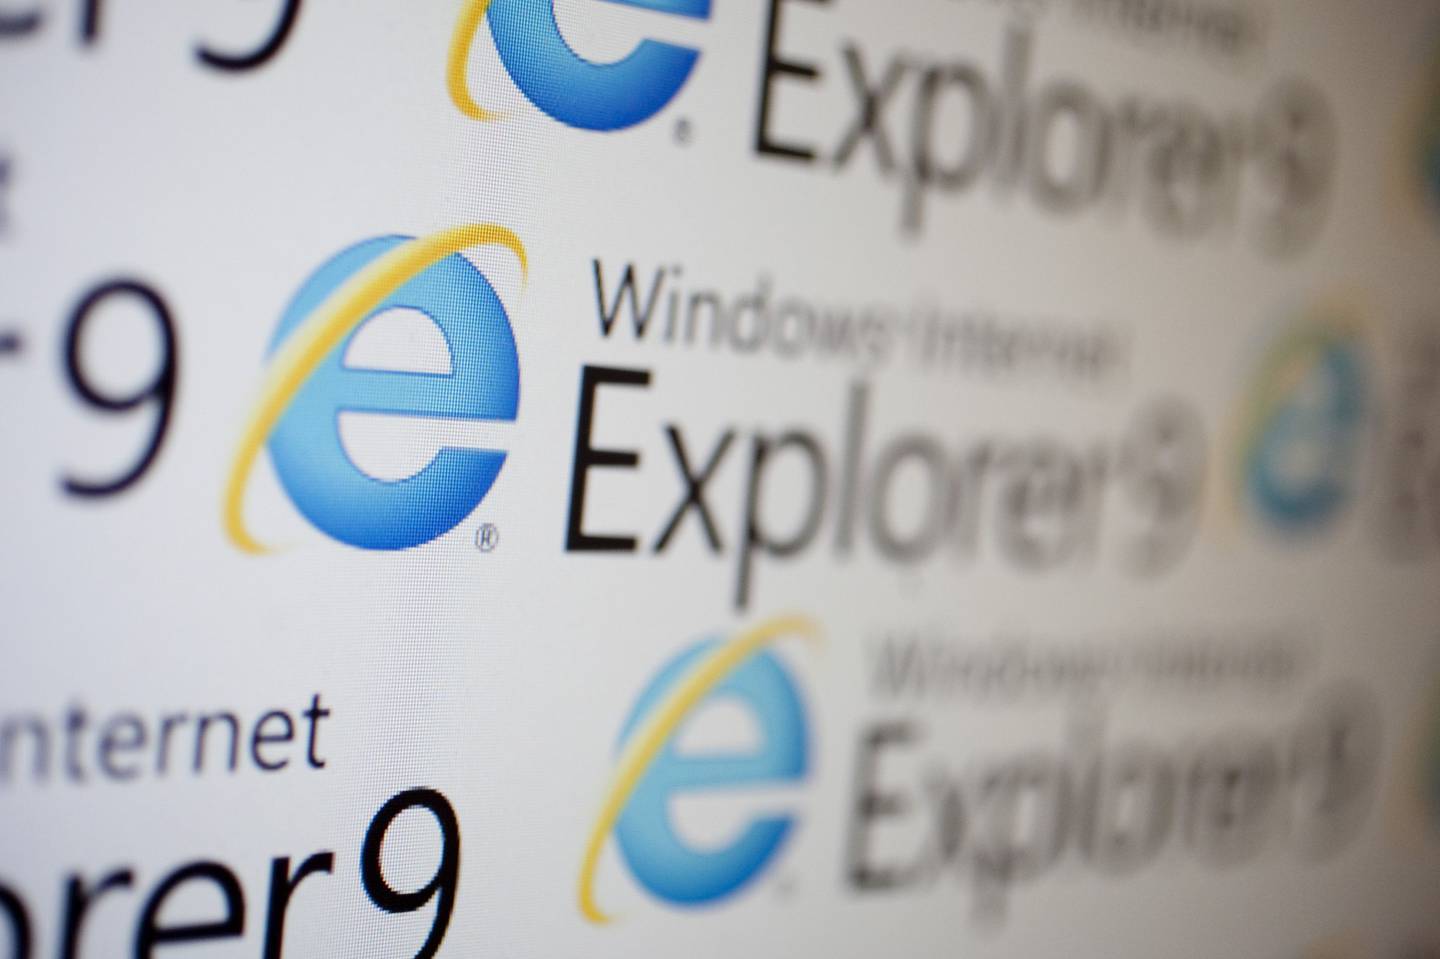 The logo of Microsoft Corp.'s Internet Explorer 9 is displayed on a computer monitor in Washington, D.C., U.S., on Tuesday, March 15, 2011. Microsoft released a speedier version of its Internet Explorer browser that adds privacy controls and video features, a bid to regain market share lost to Firefox and Google Inc.'s Chrome. Photographer: Andrew Harrer/Bloomberg